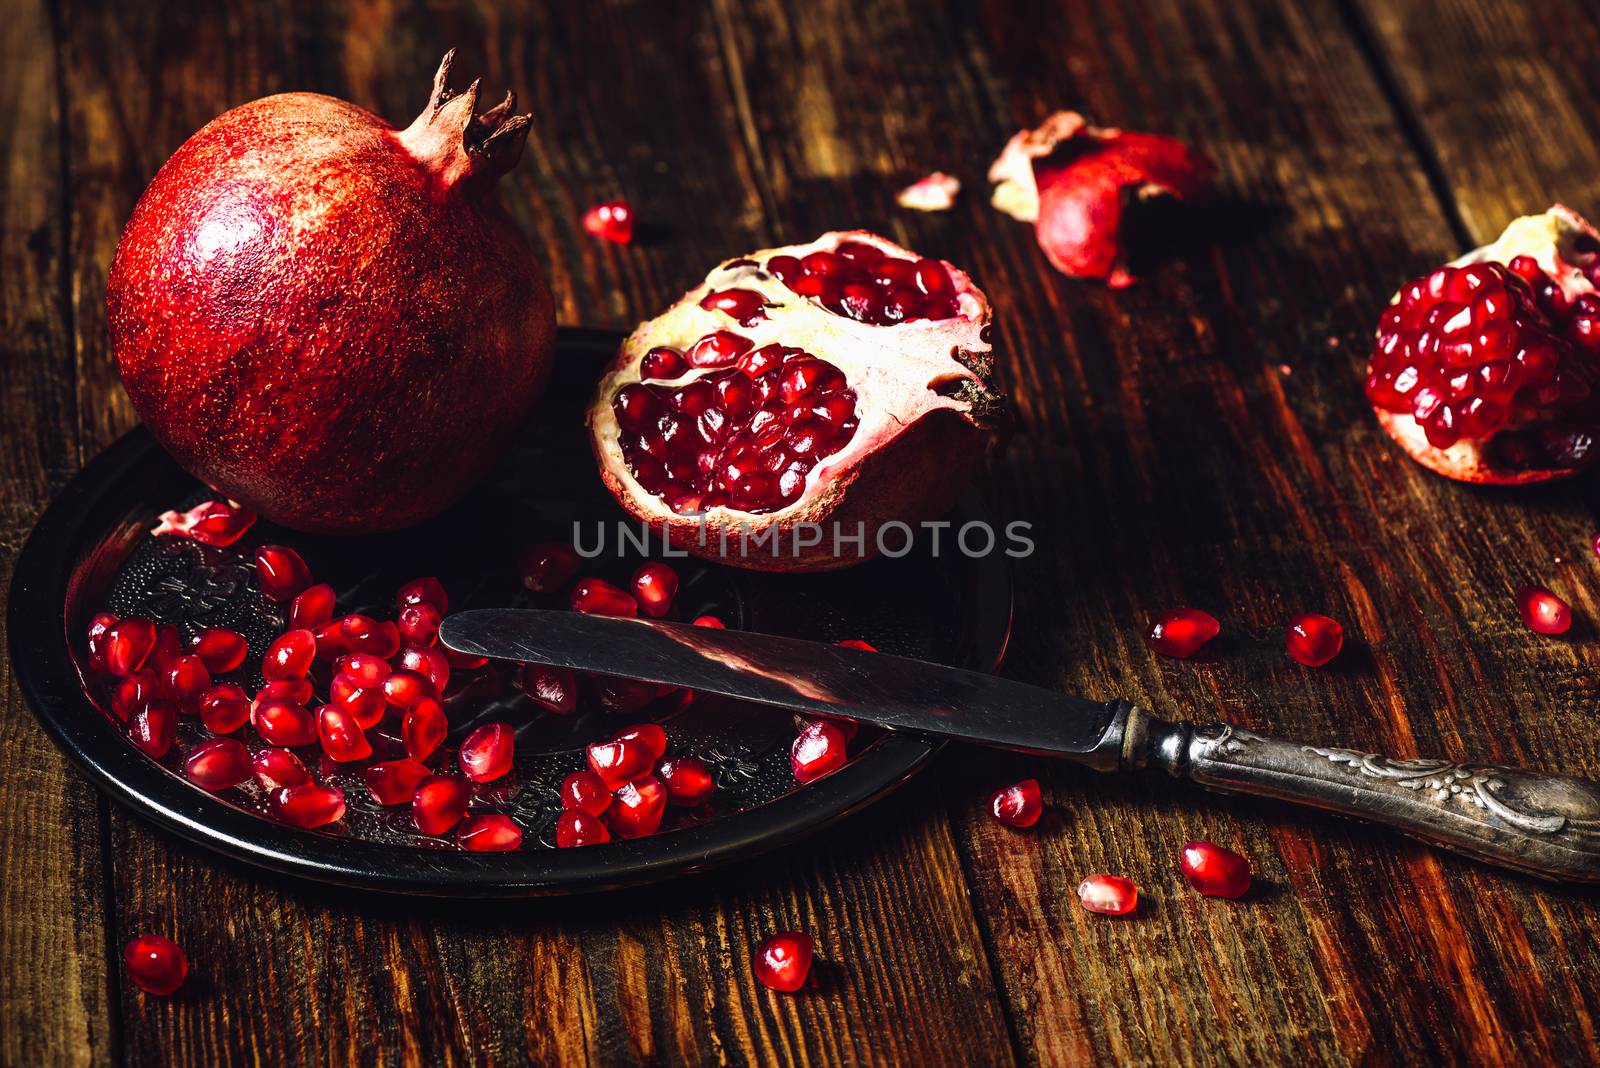 Opened Pomegranate and Whole One wiith Seeds on Metal Plate and Vintage Knife. Some Seeds and Pieces Scattered on Wooden Surface.